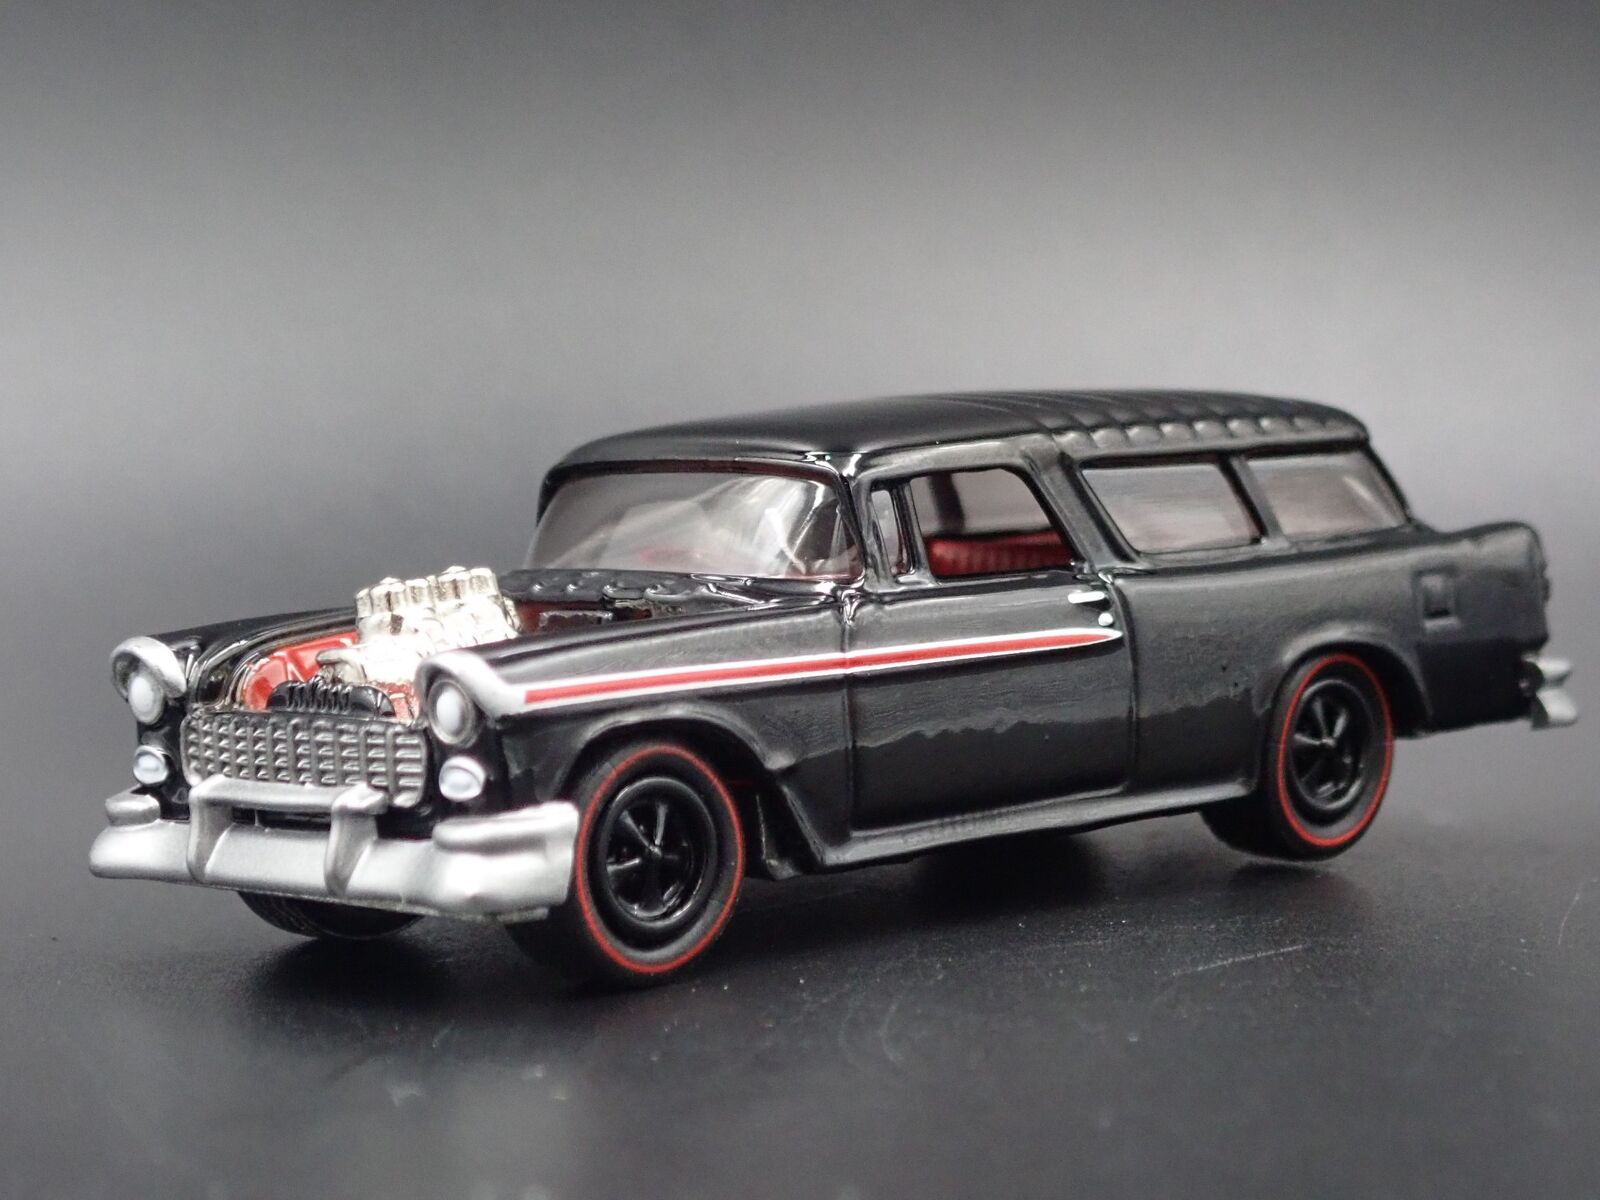 1955 55 CHEVY CHEVROLET NOMAD 1:64 SCALE COLLECTIBLE DIORAMA DIECAST MODEL CAR